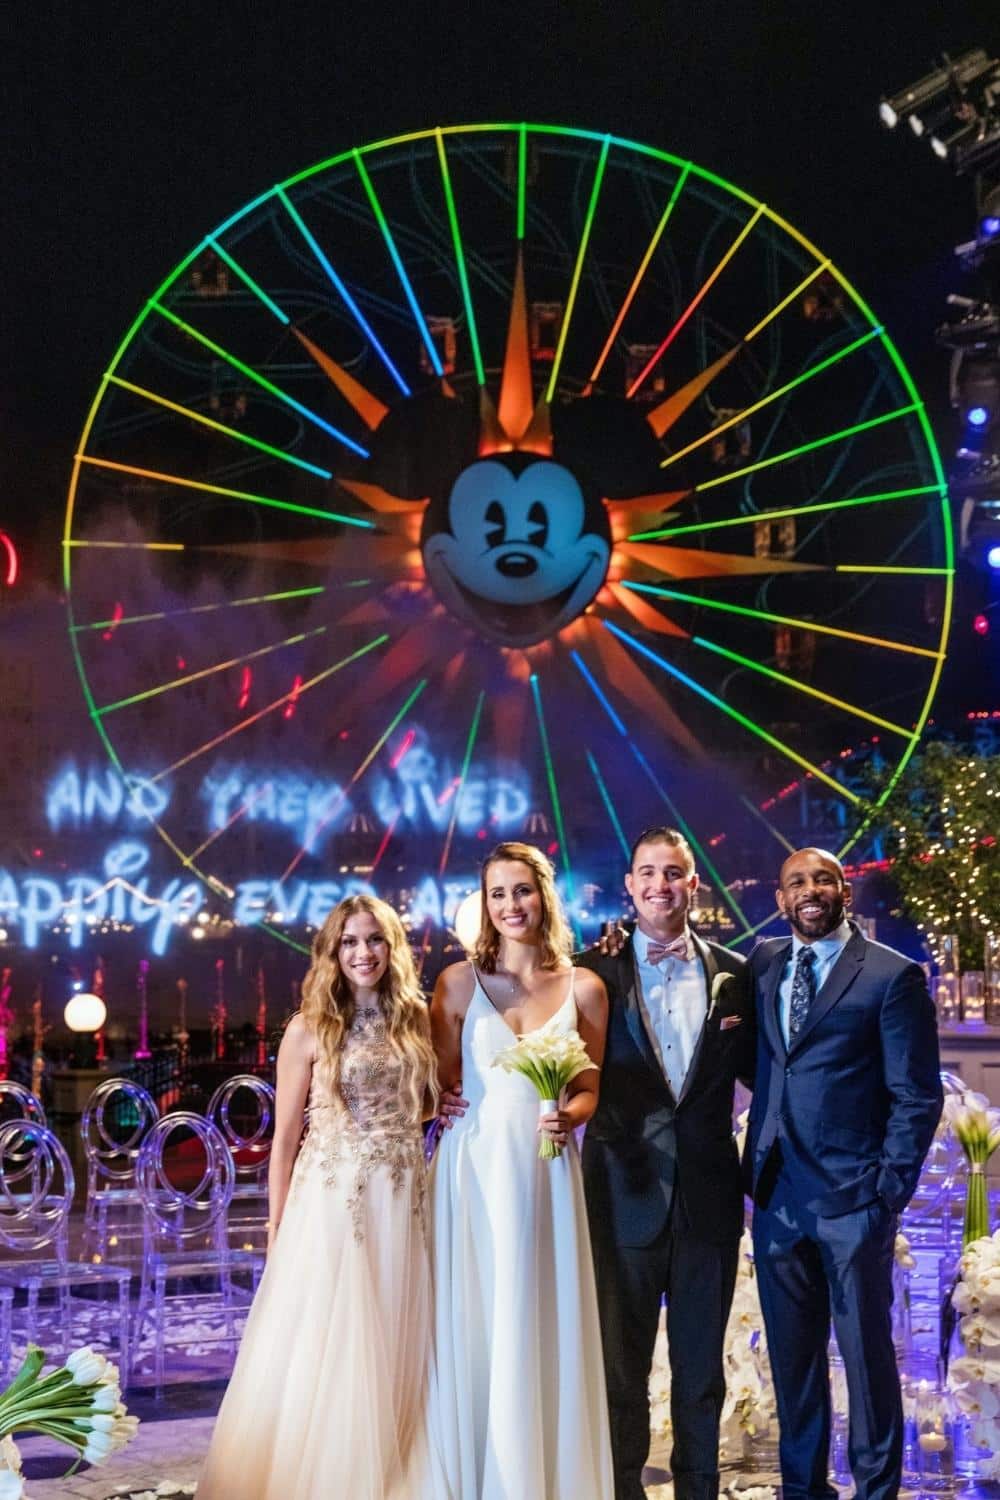 Photo of a bride and groom with Alison Holker Boss and Stephen Twitch Boss posing in front of Mickey's Fun Wheel at Disneyland.